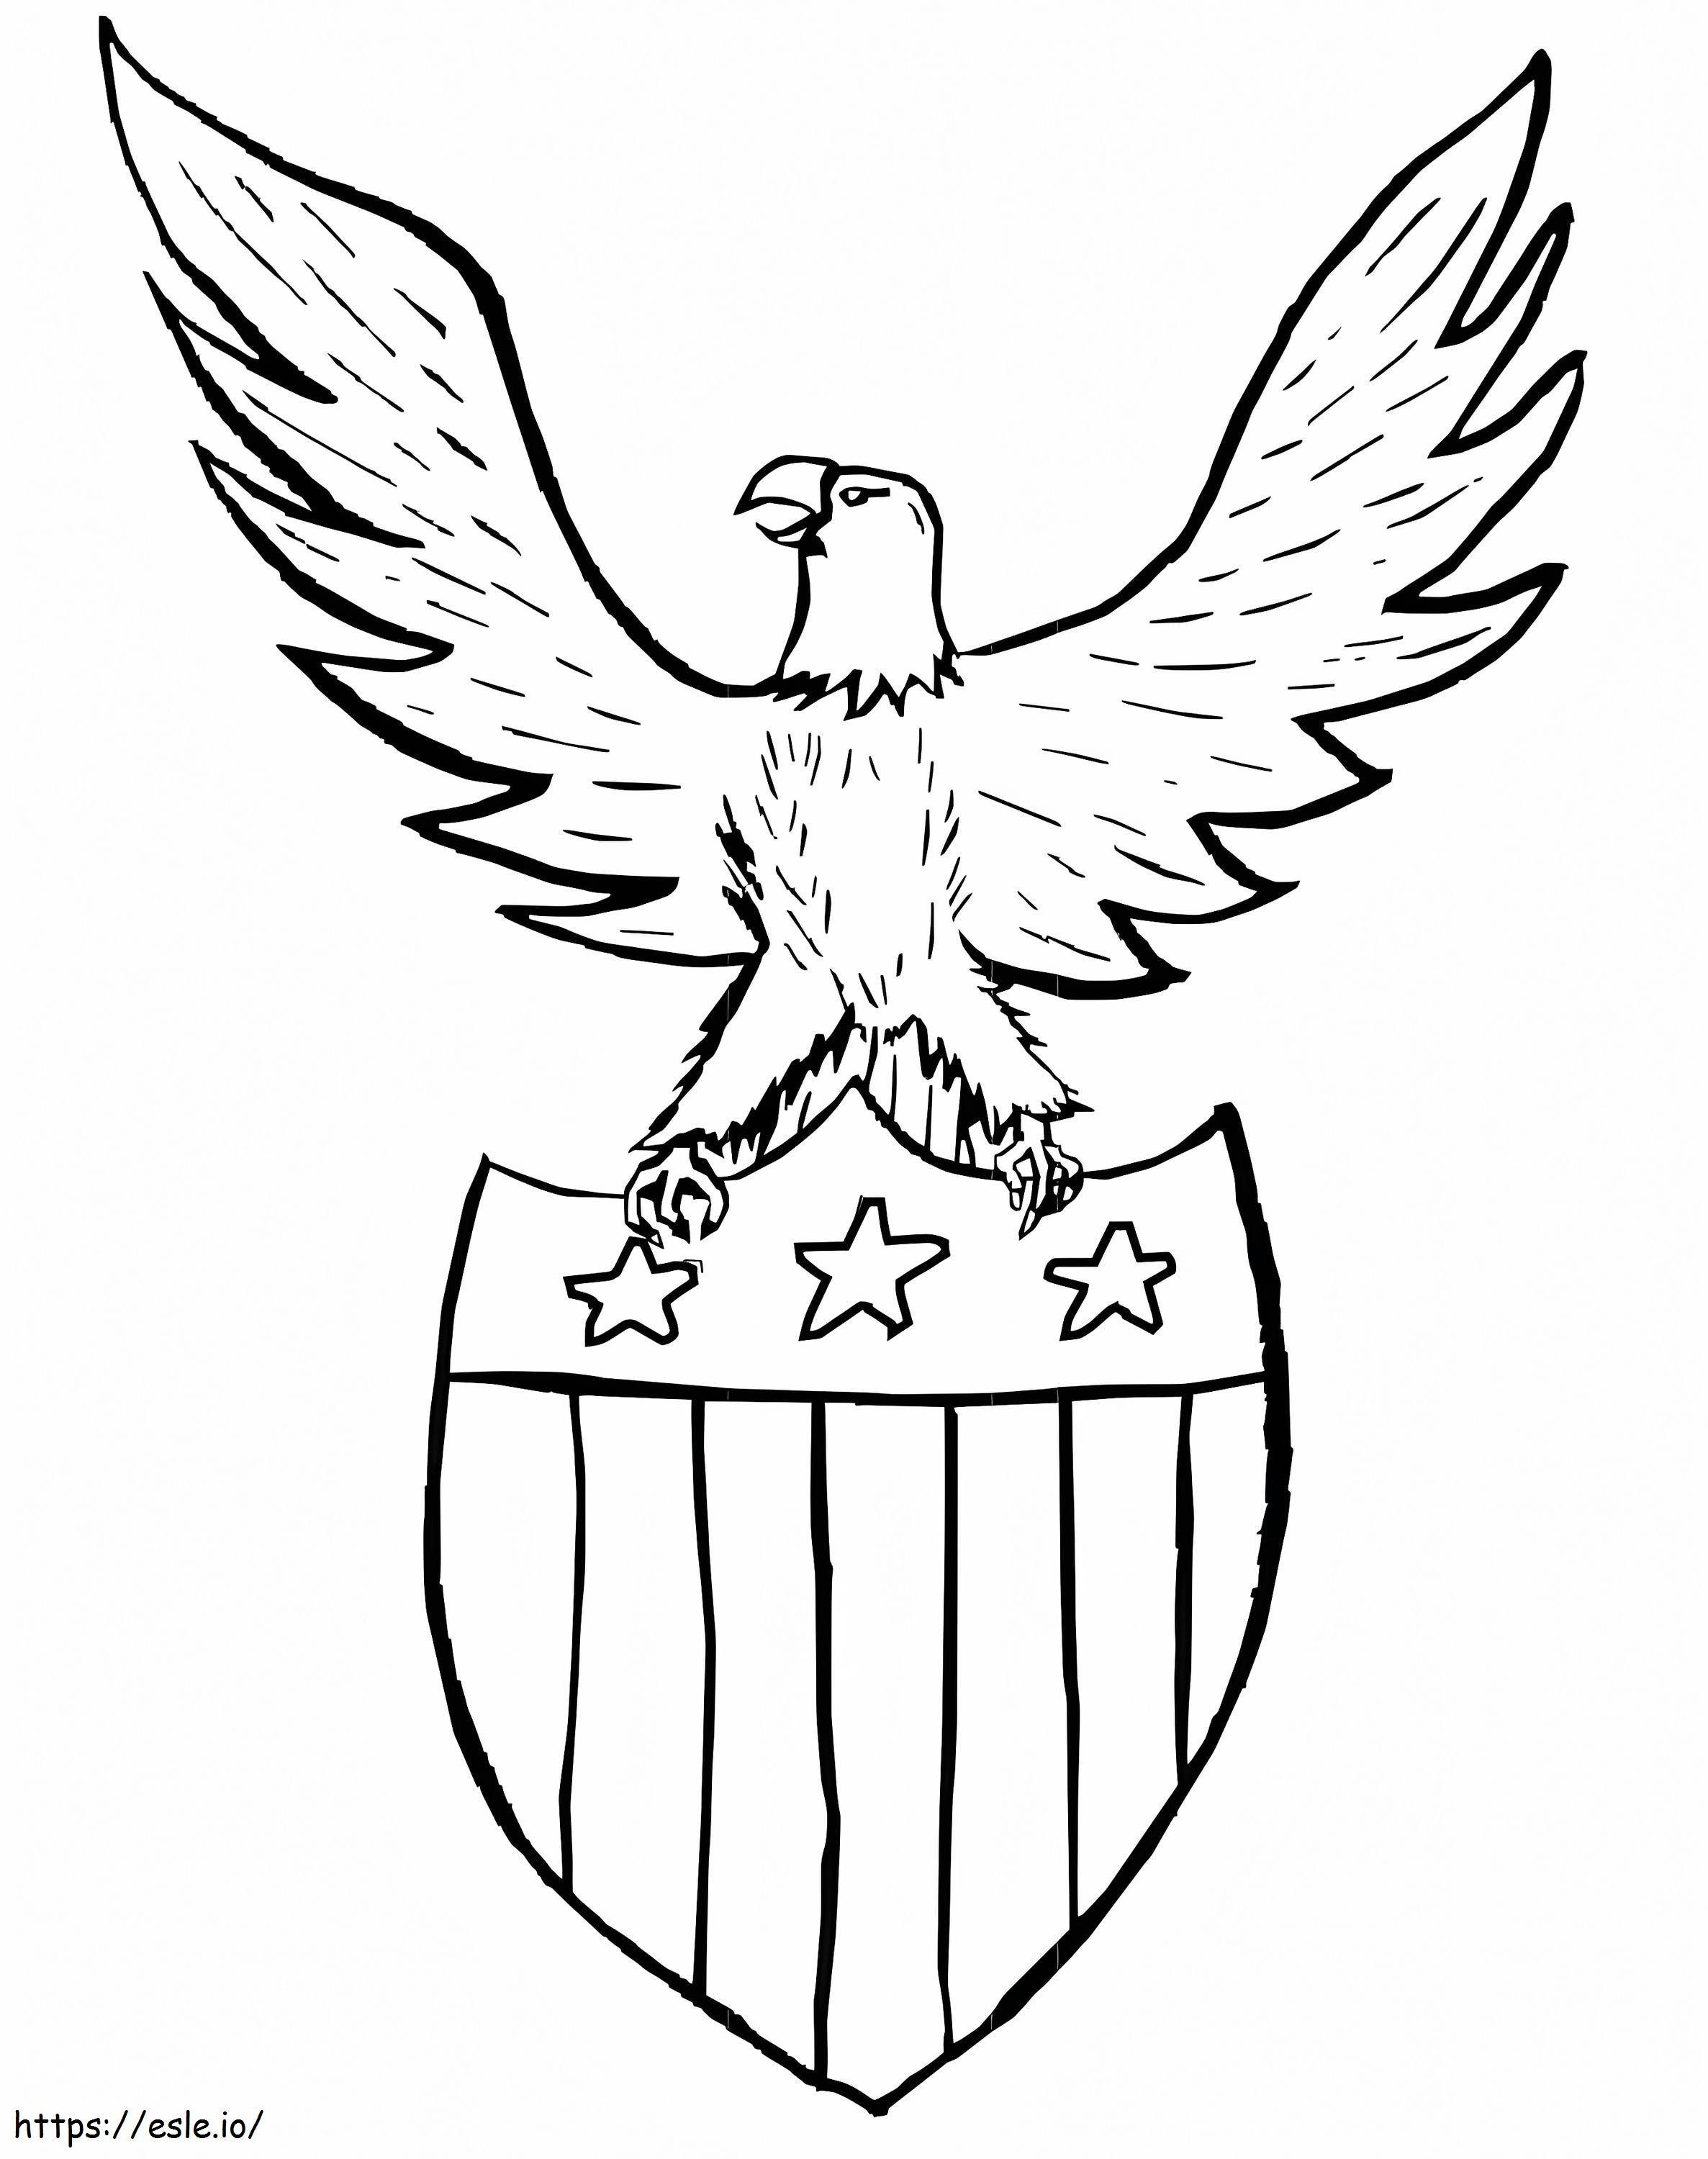 Eagle 3 Coloring Page coloring page